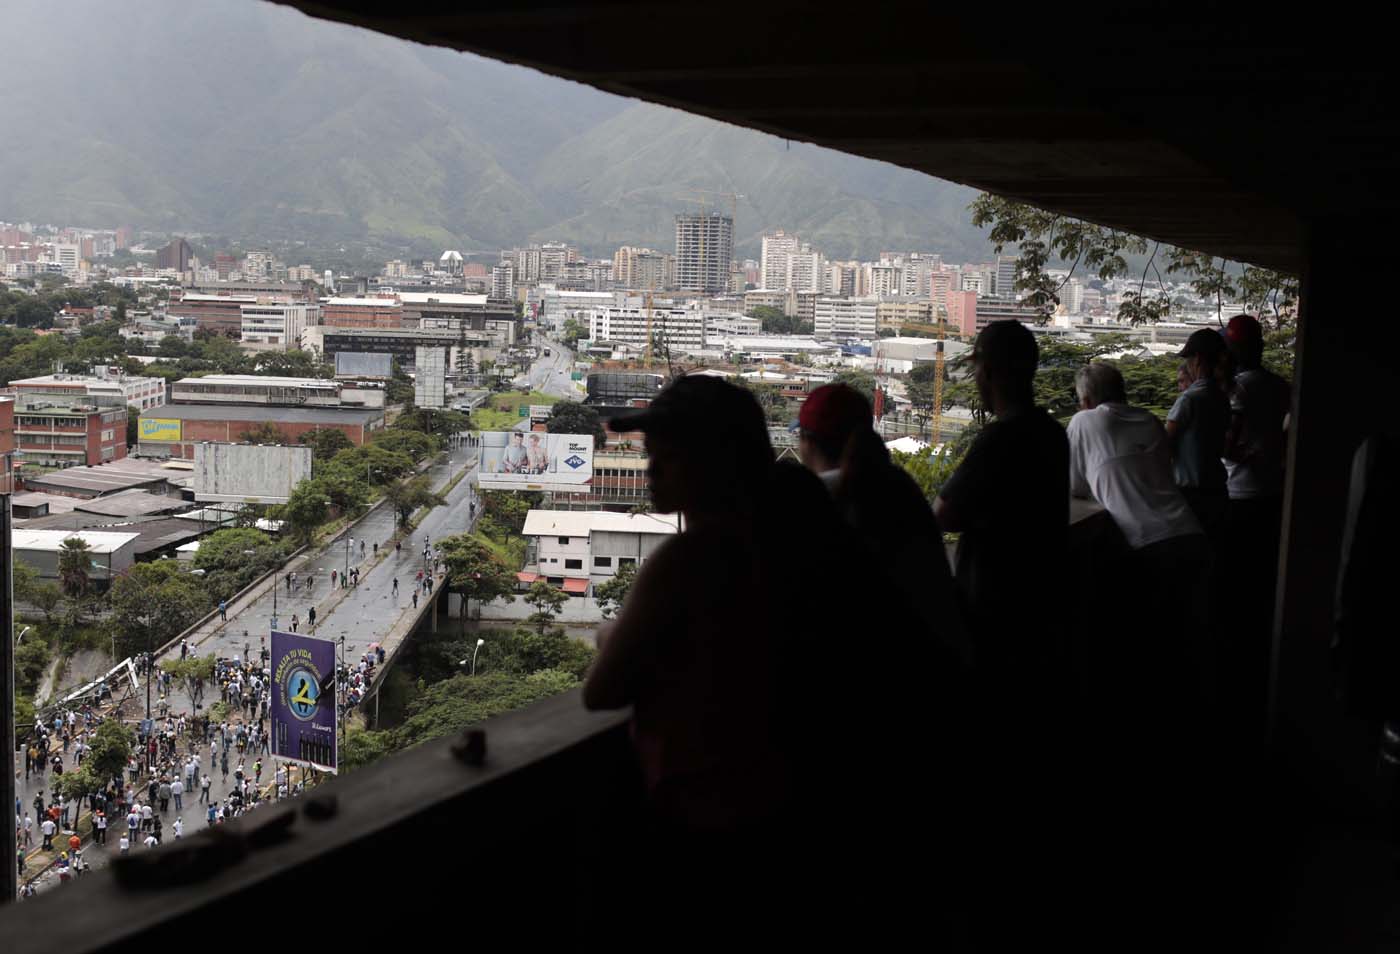 People watch from a balcony as opposition demonstrators set up a barricade on a bridge as clashes broke out with security forces while the Constituent Assembly election was being carried out in Caracas, Venezuela, July 30, 2017. REUTERS/Marco Bello